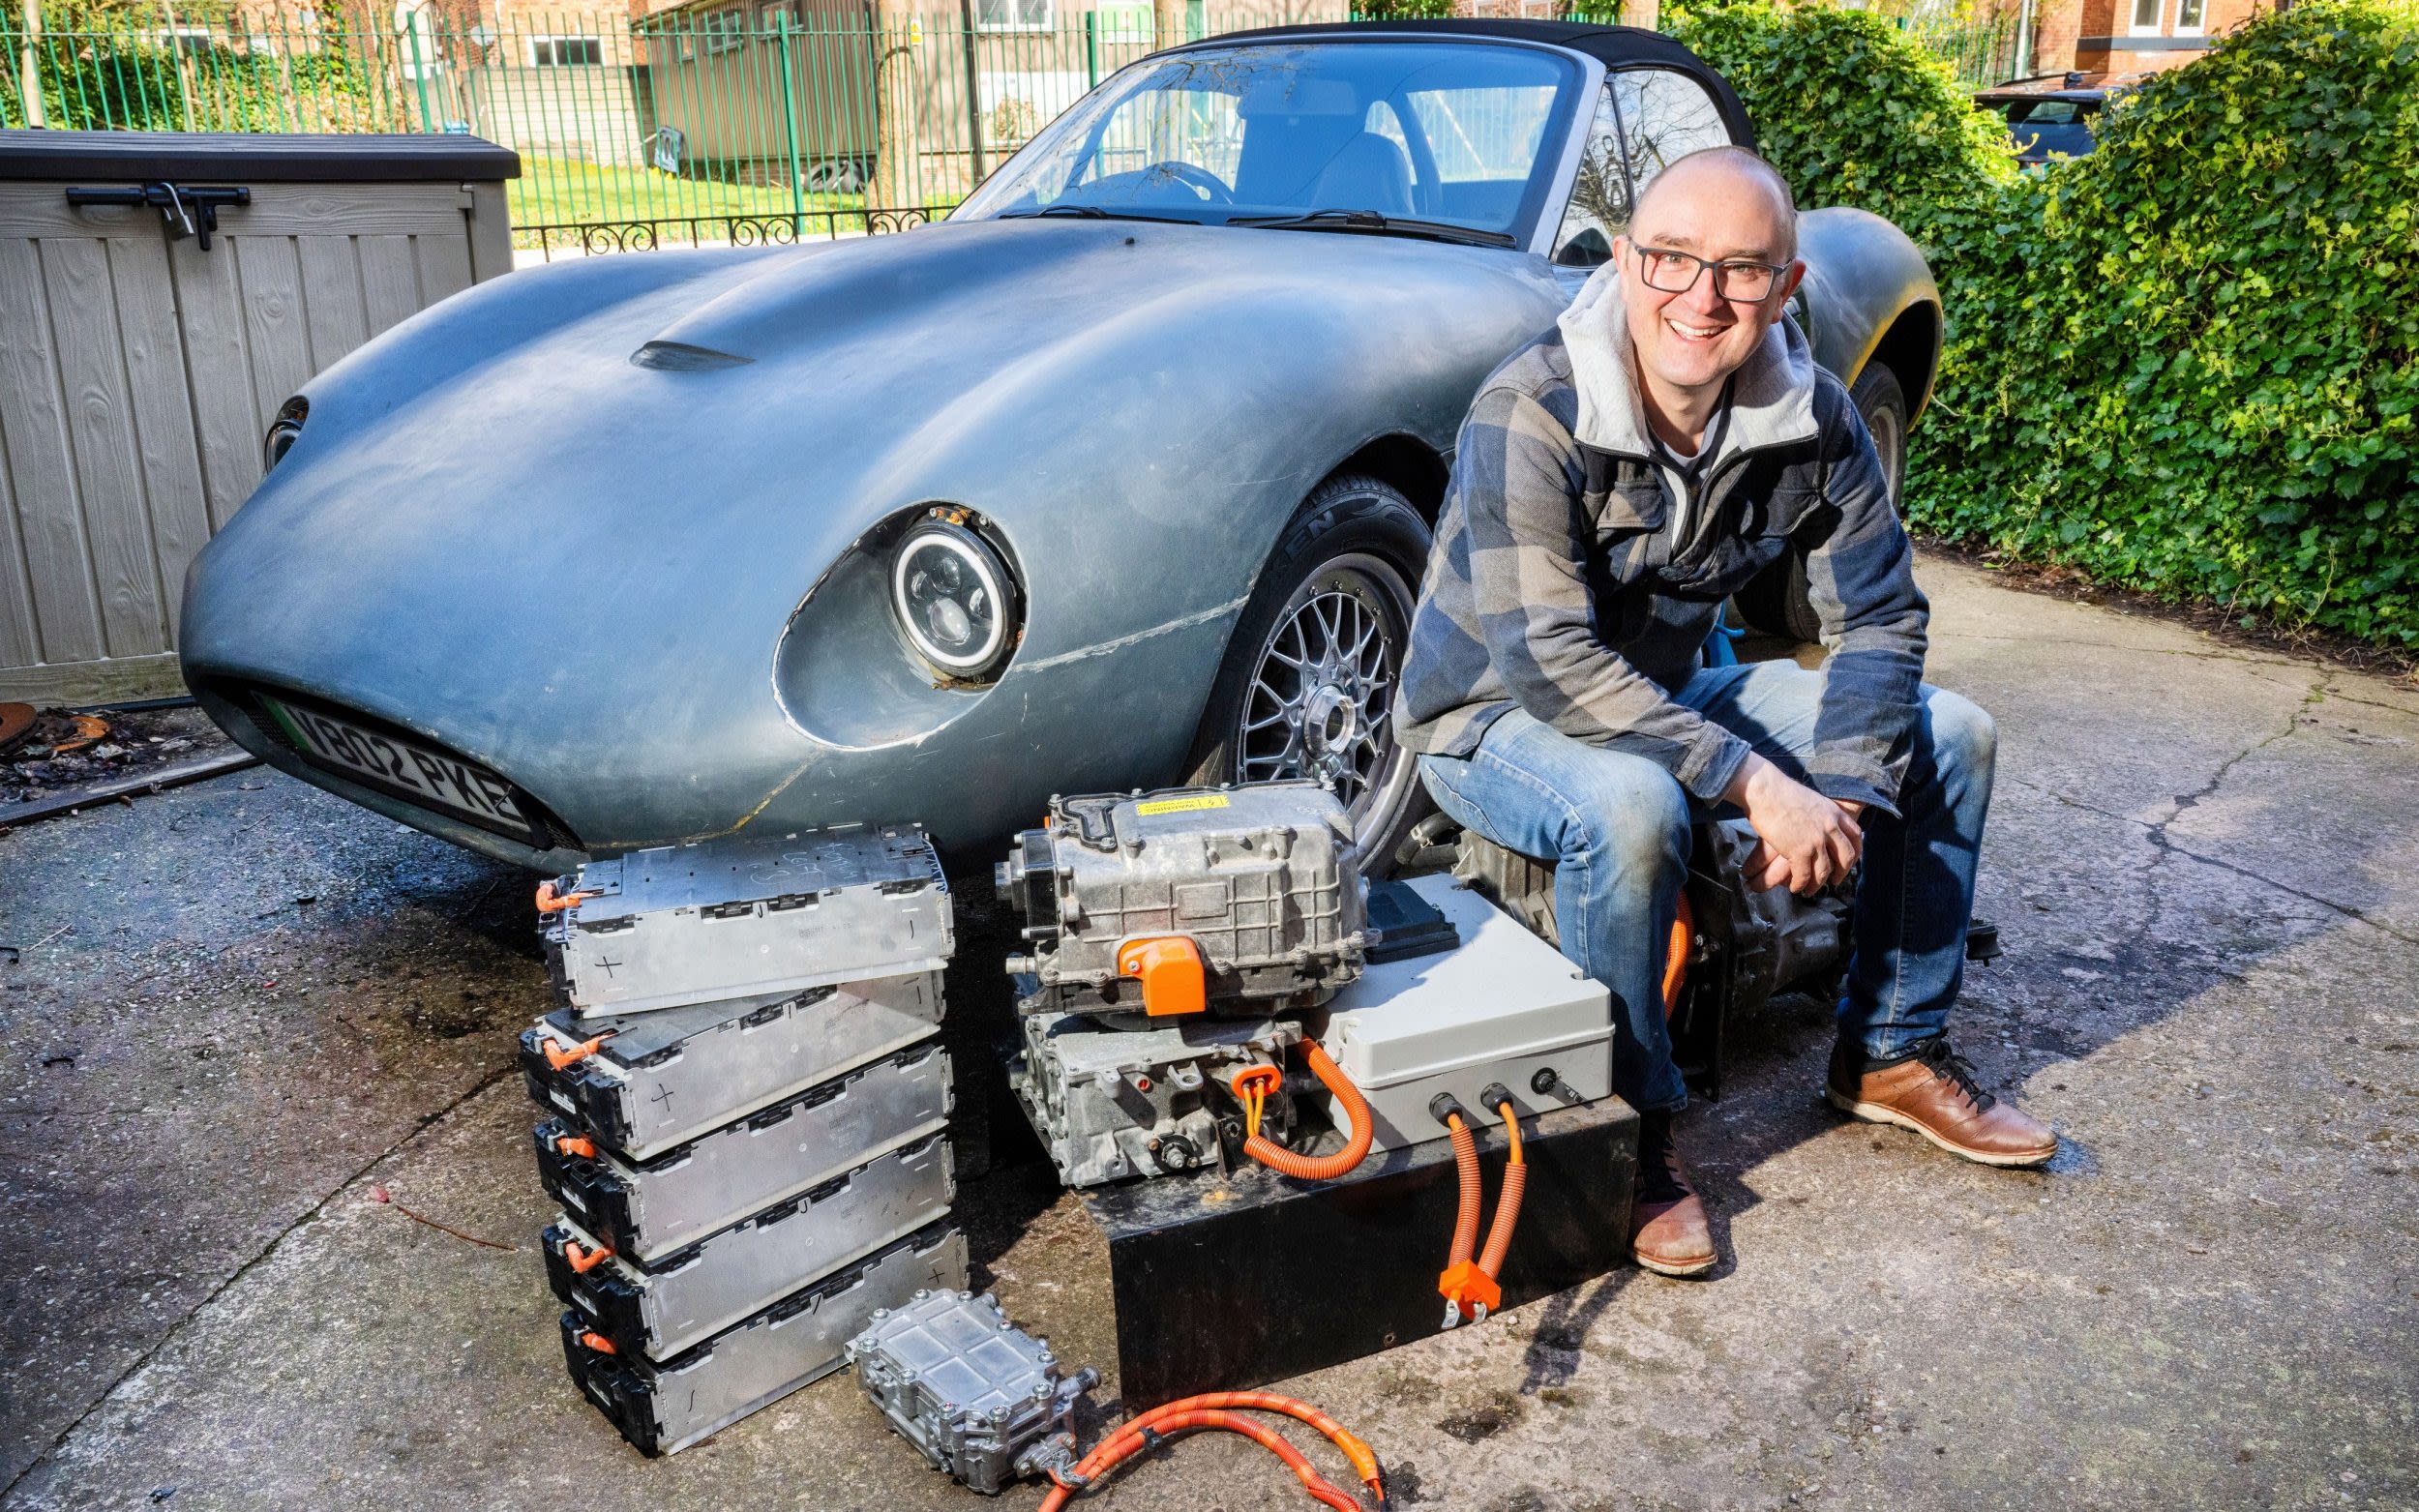 How to build your own electric car for £10,000